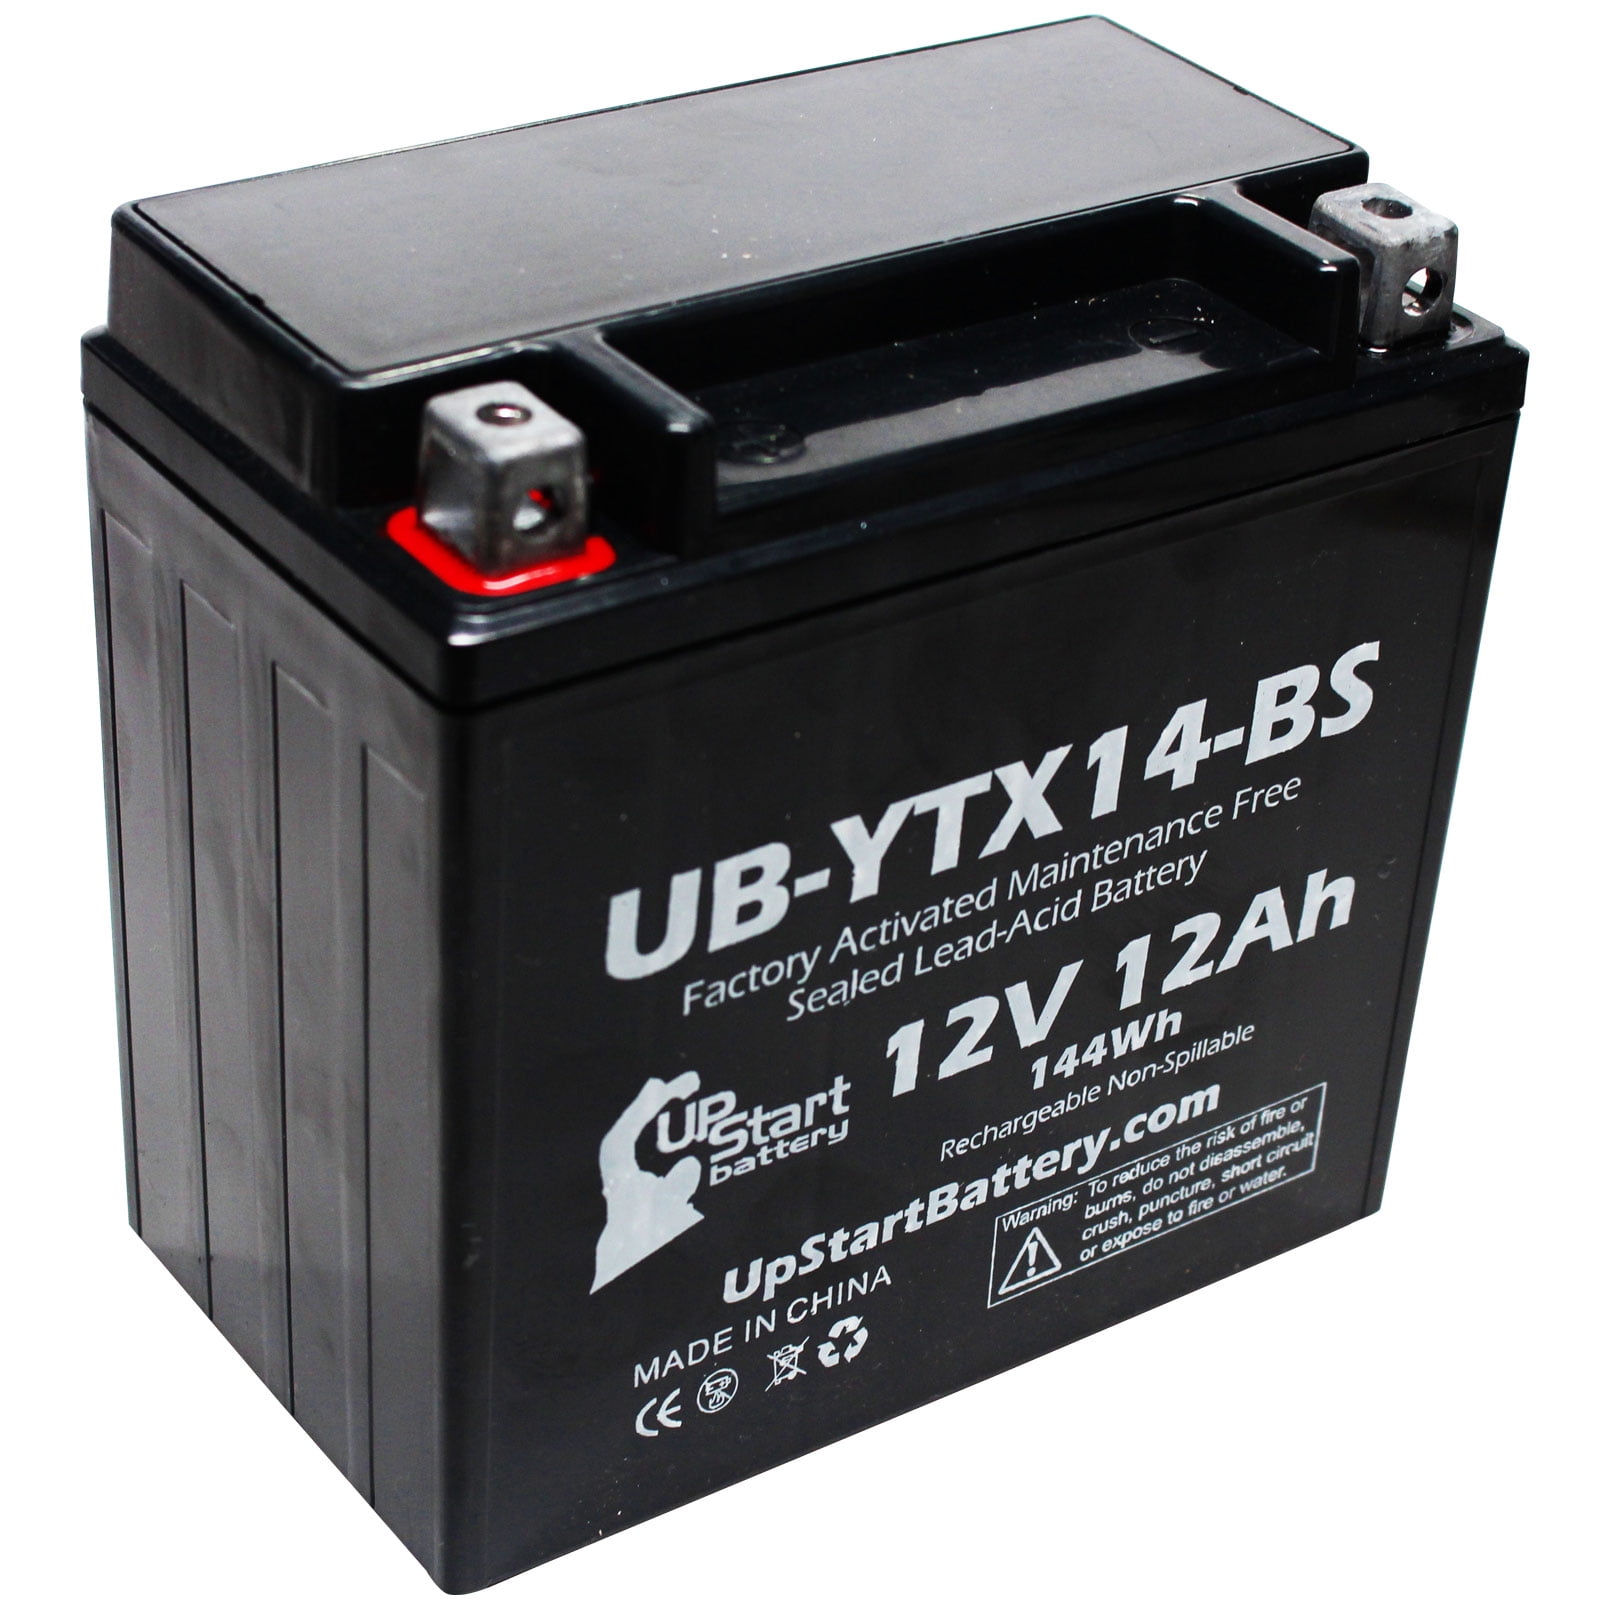 Piaggio Mighty Max Battery YTX14-BS Replacement Battery for Vespa MP3 250 2008-2009 Brand Product 